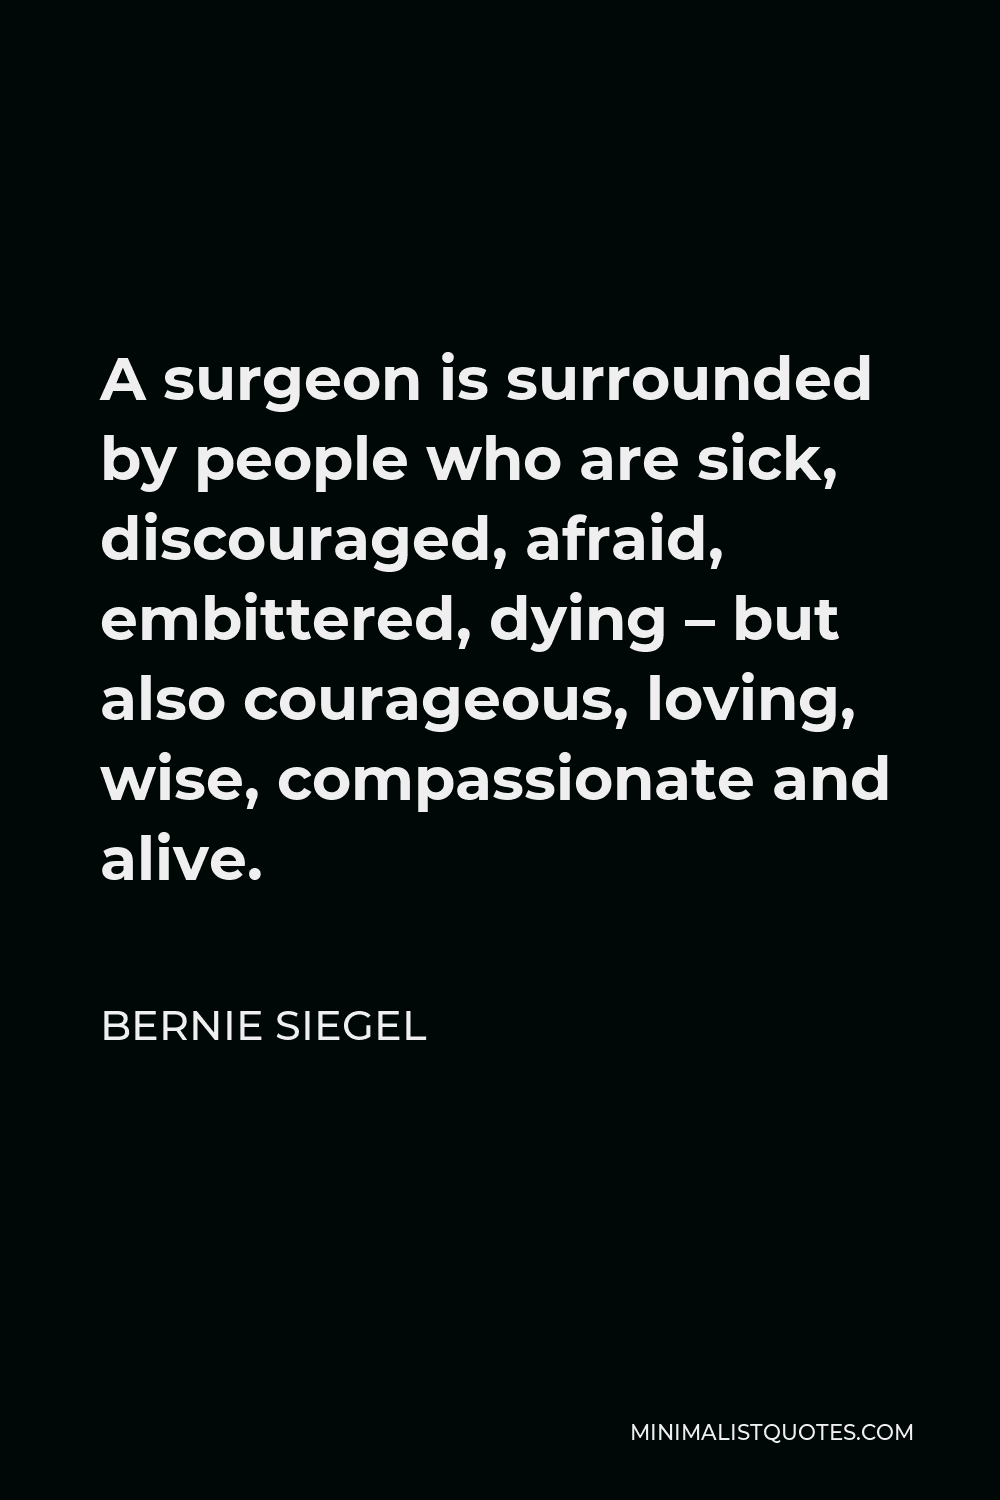 Bernie Siegel Quote - A surgeon is surrounded by people who are sick, discouraged, afraid, embittered, dying – but also courageous, loving, wise, compassionate and alive.